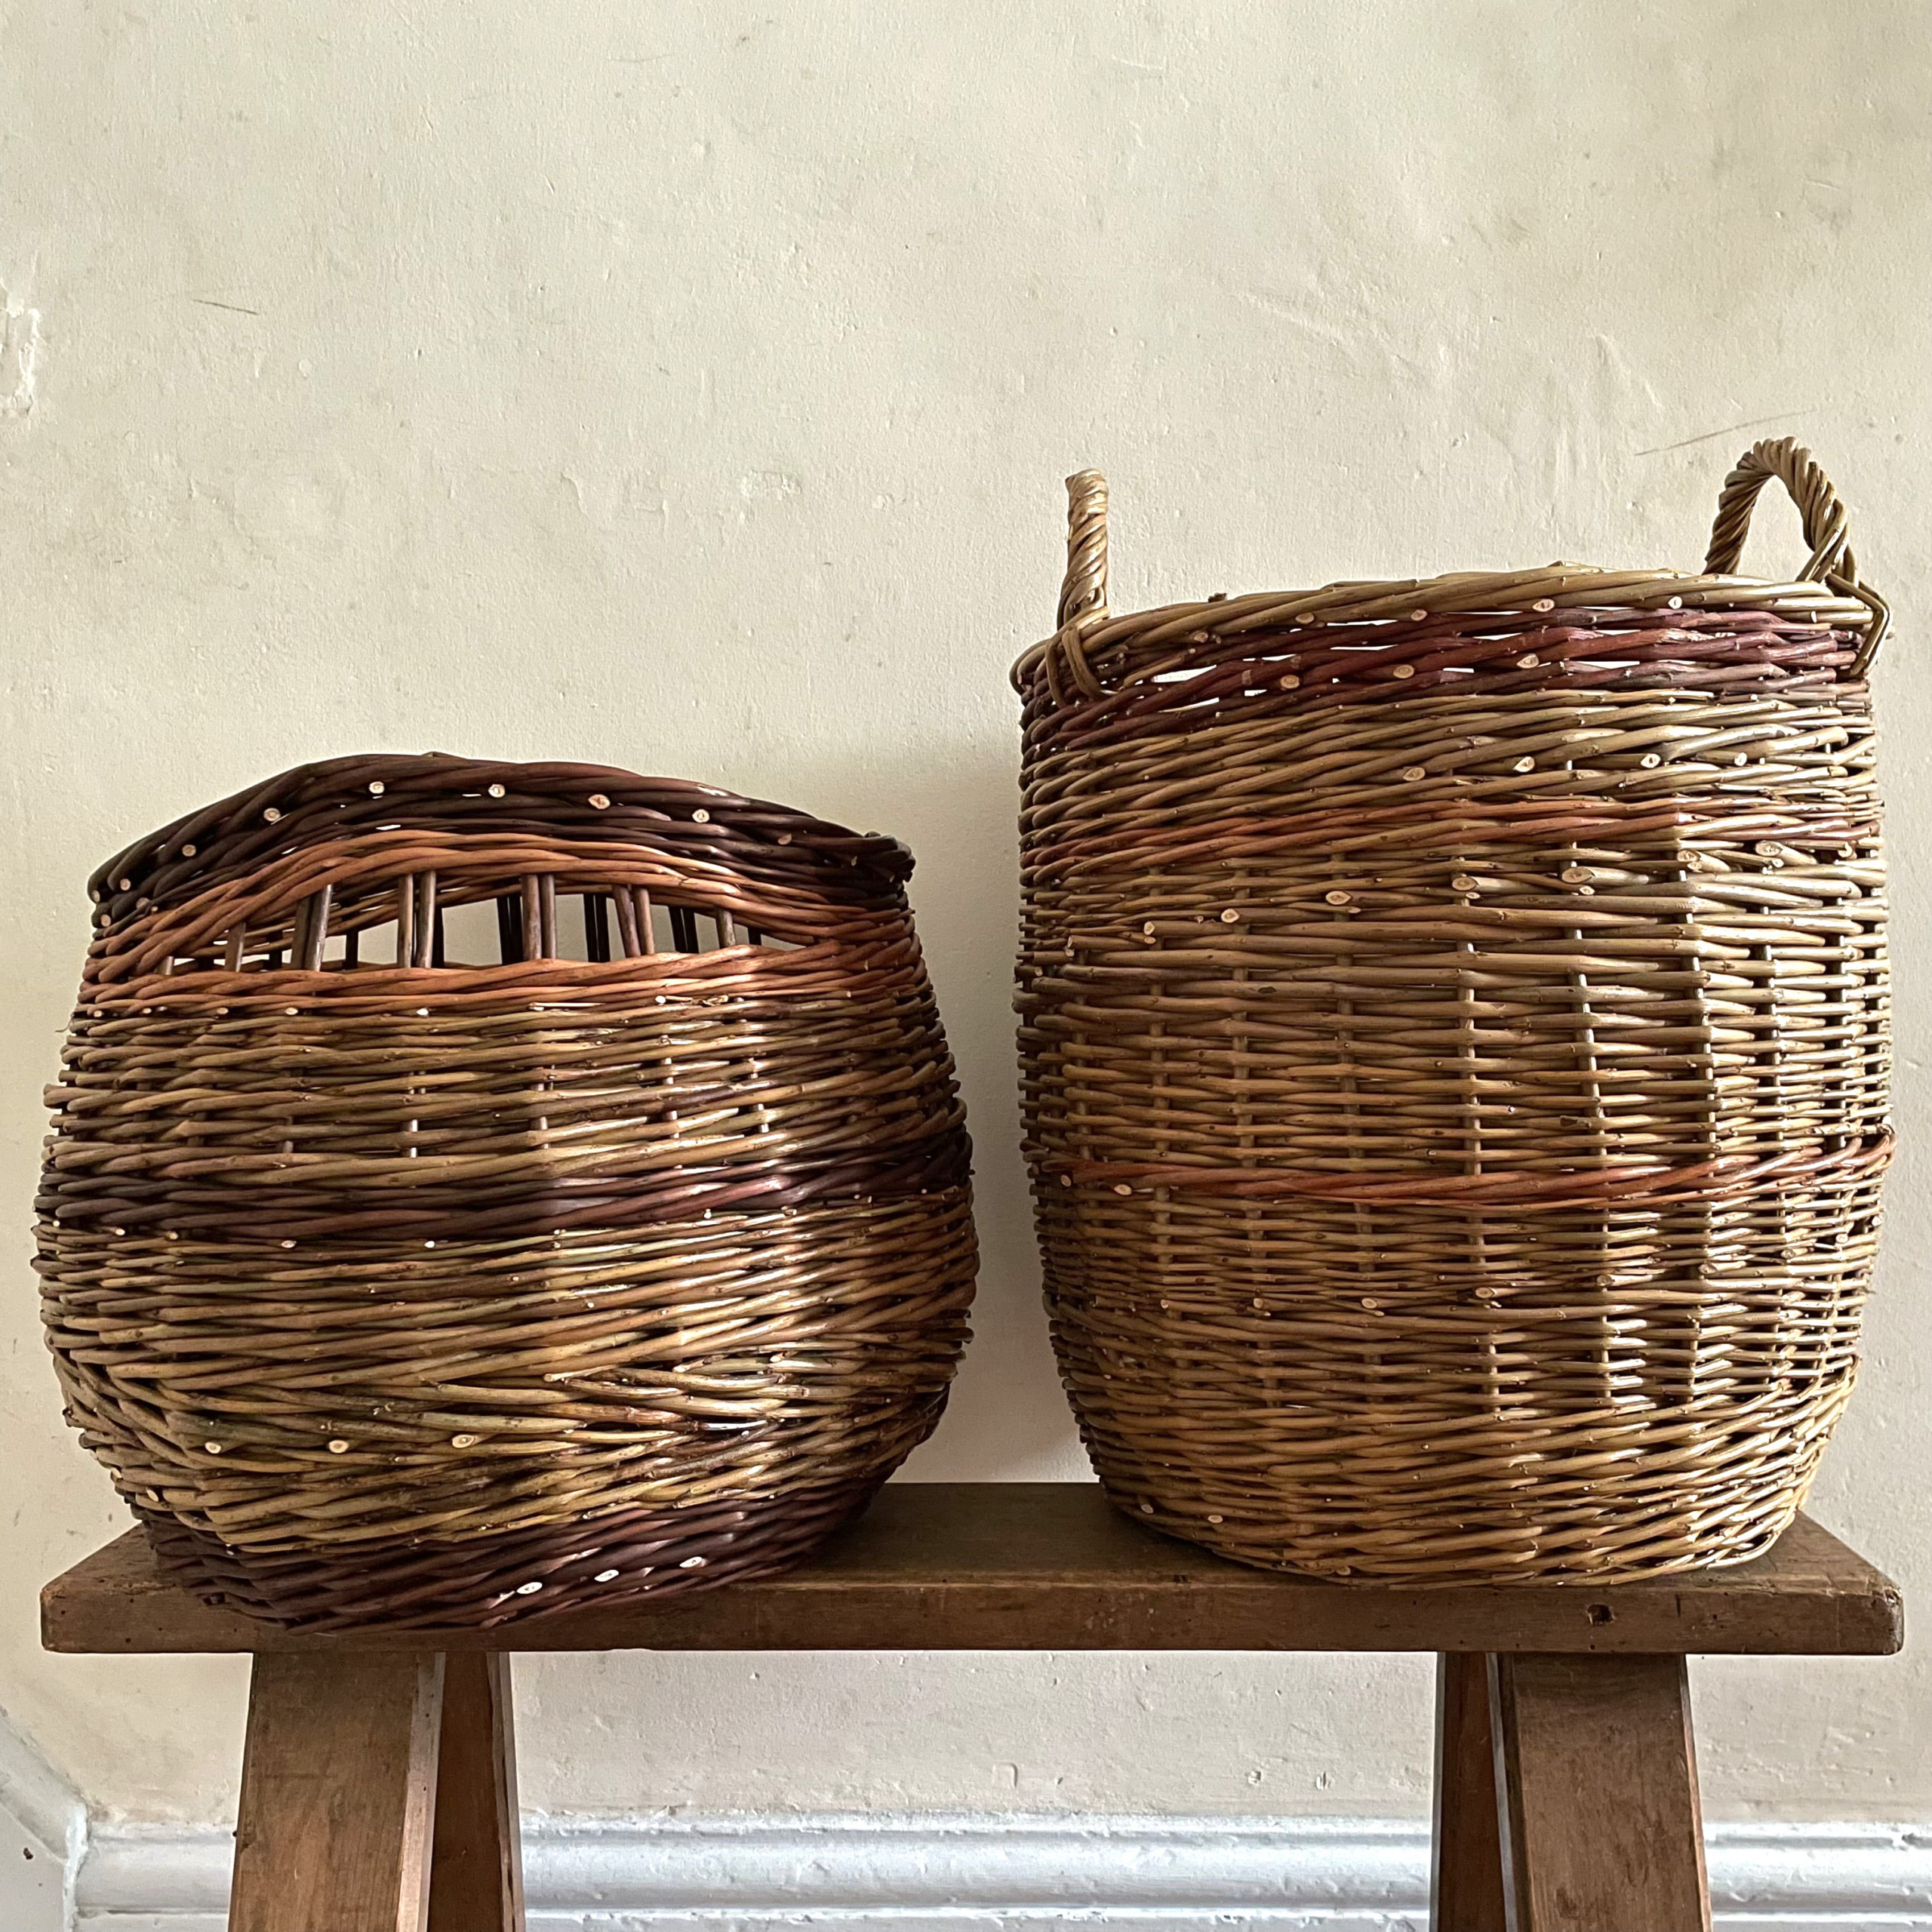 2 Day Oval Basket Workshop Wednesday 27th & Thursday 28th March